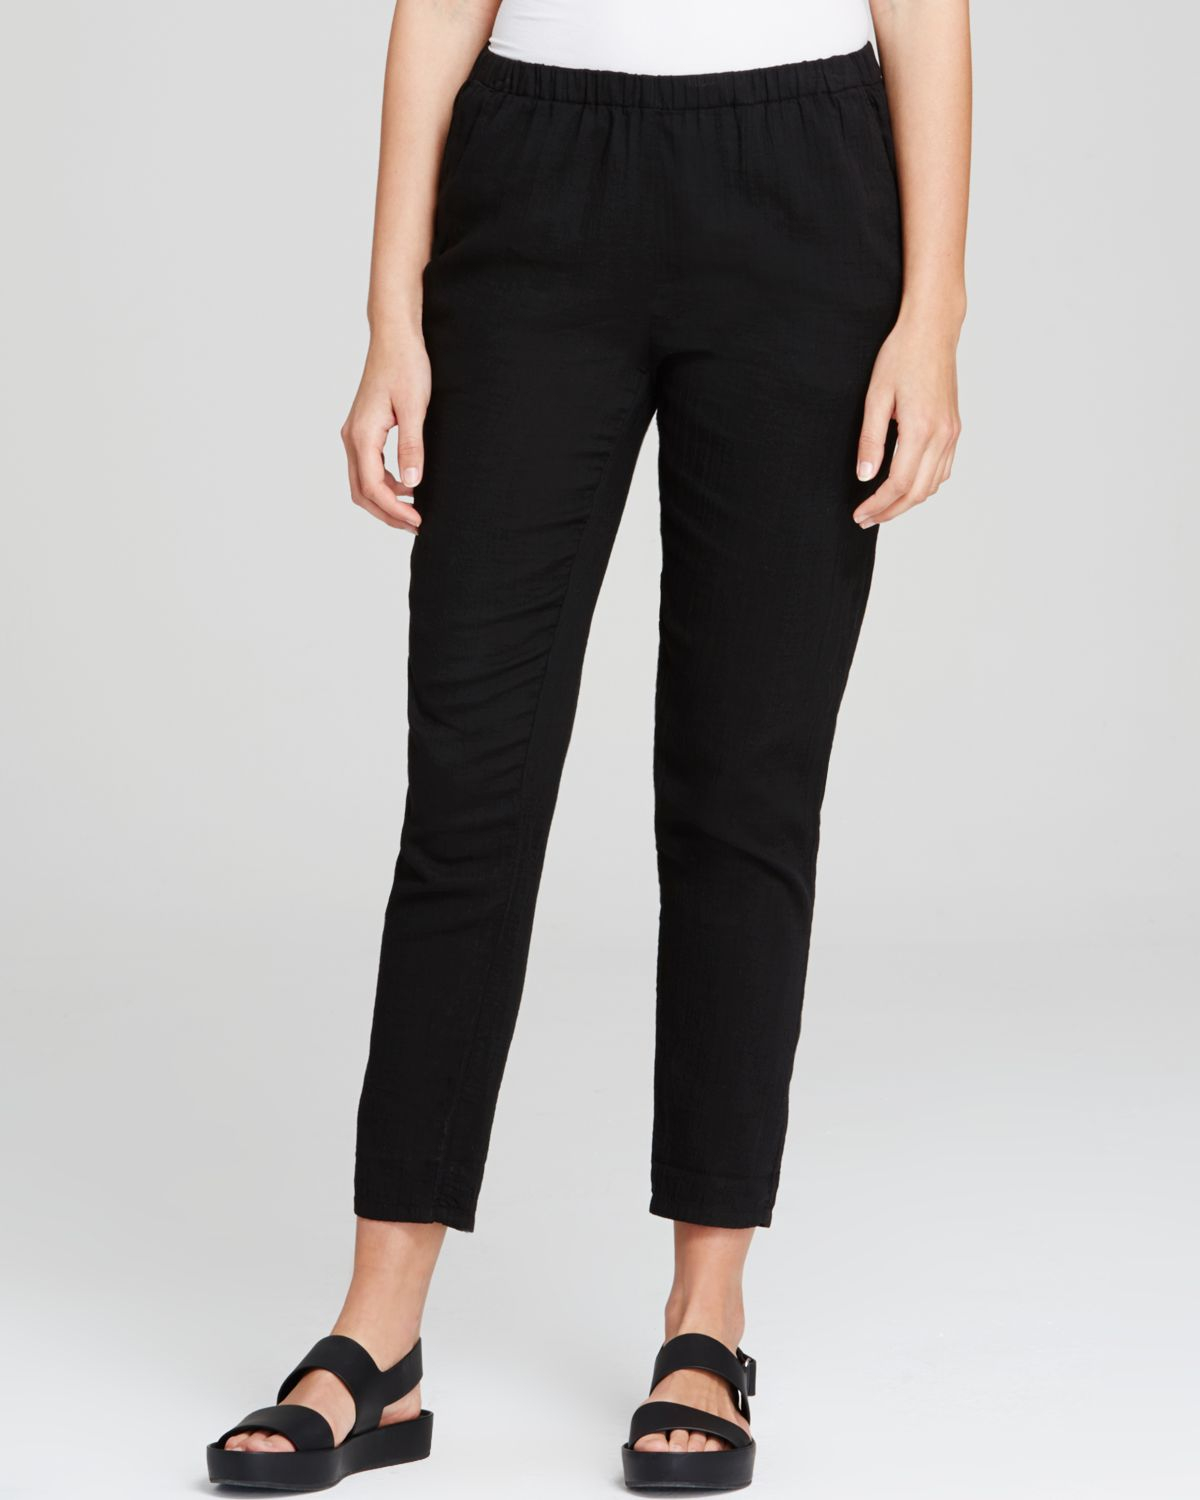 Eileen Fisher Petites Tapered Cotton Ankle Pants in Black | Lyst